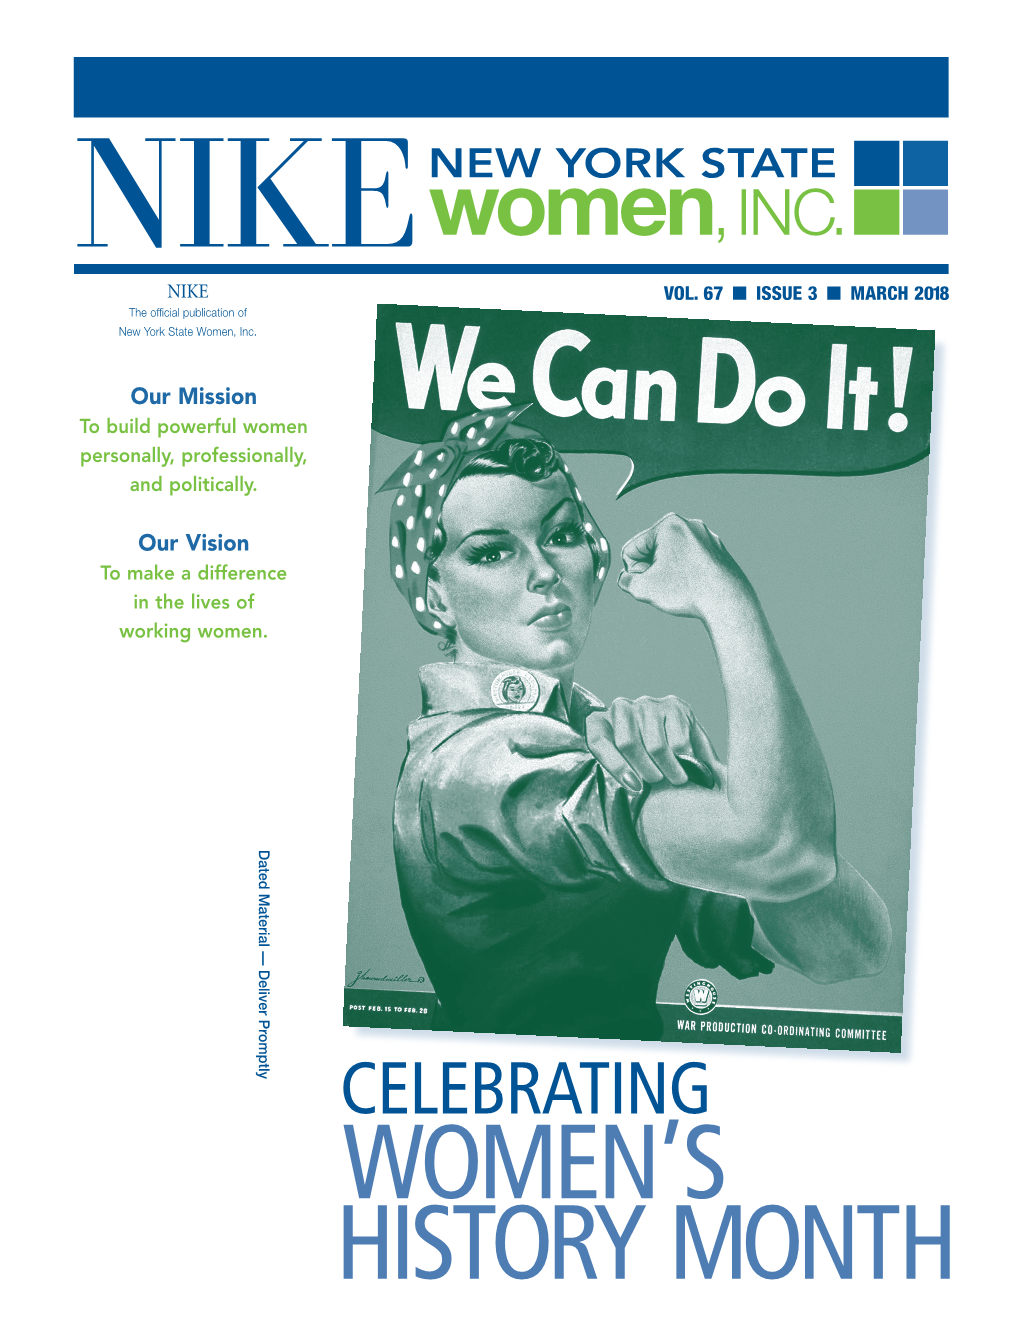 MARCH 2018 the Official Publication of New York State Women, Inc